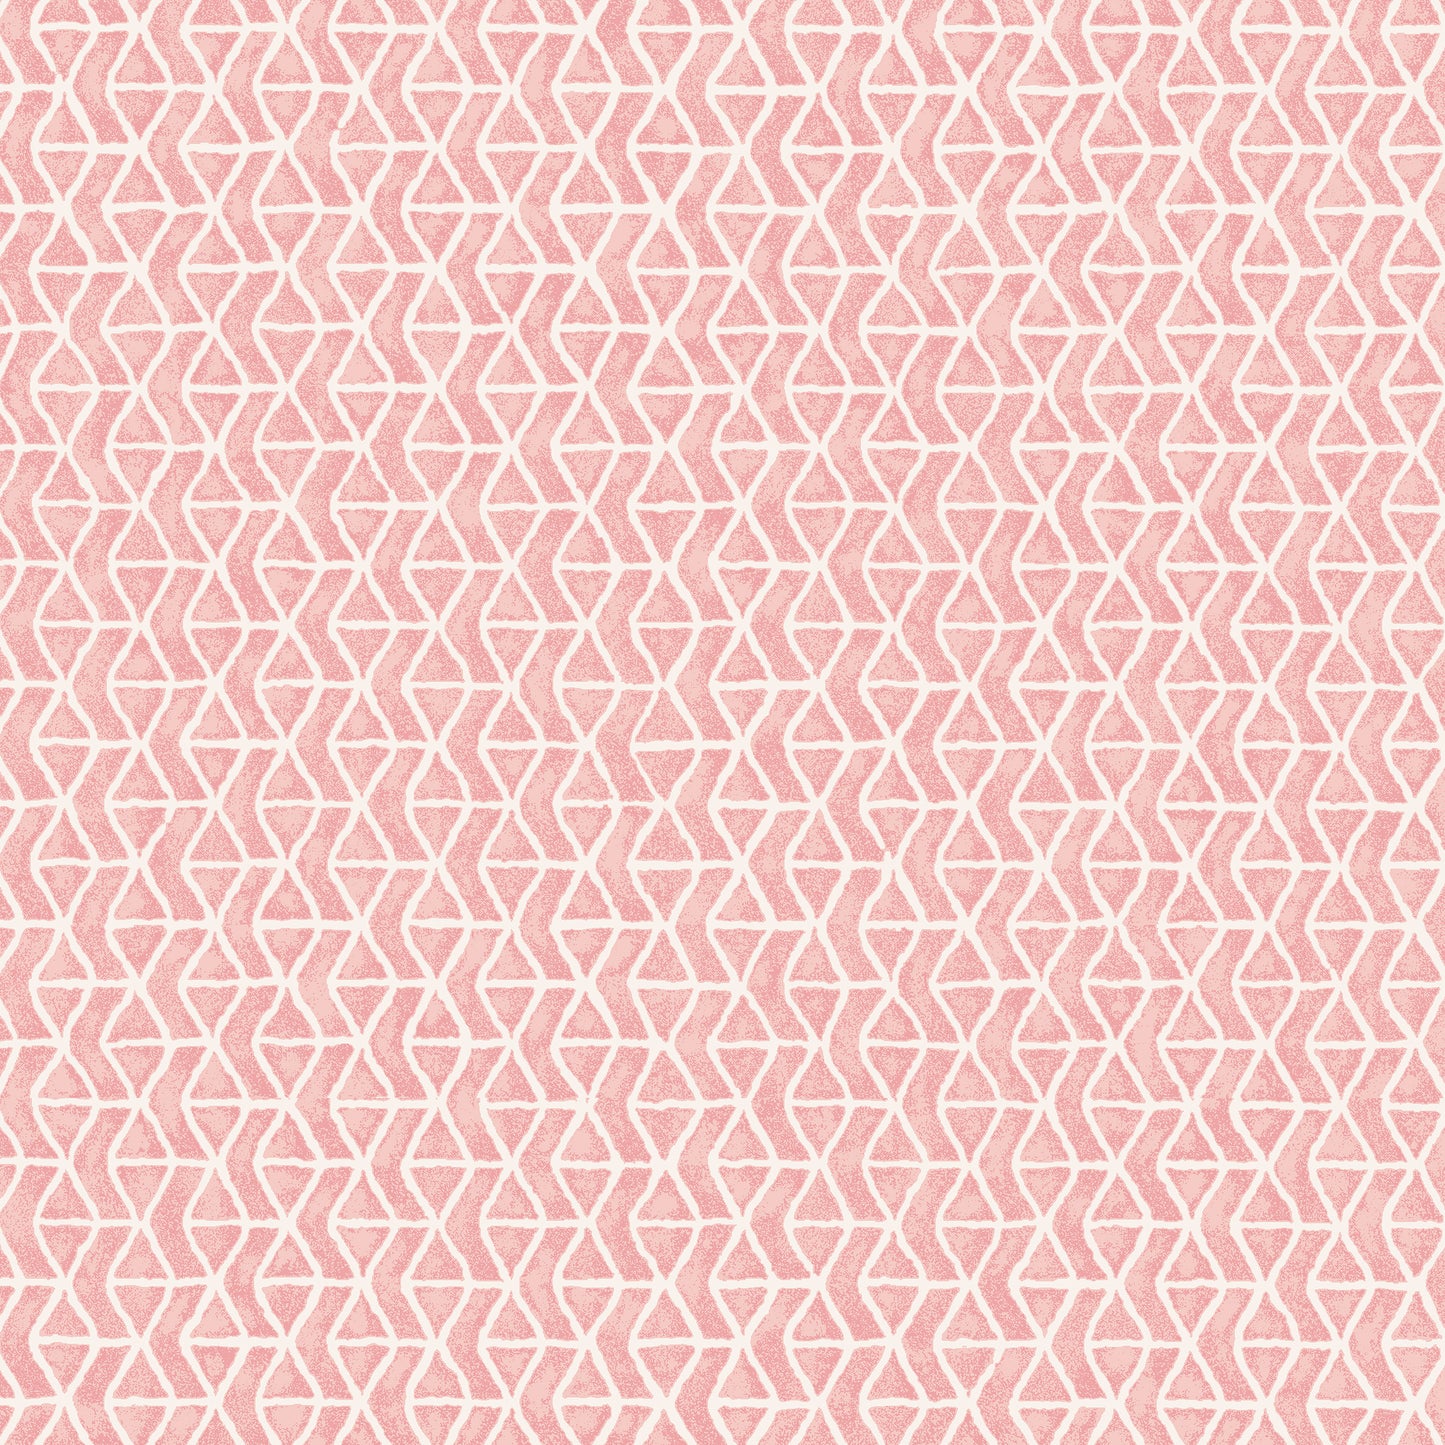 Purchase Thibaut Wallpaper Product T42001 pattern name Stony Brook color Blush. 